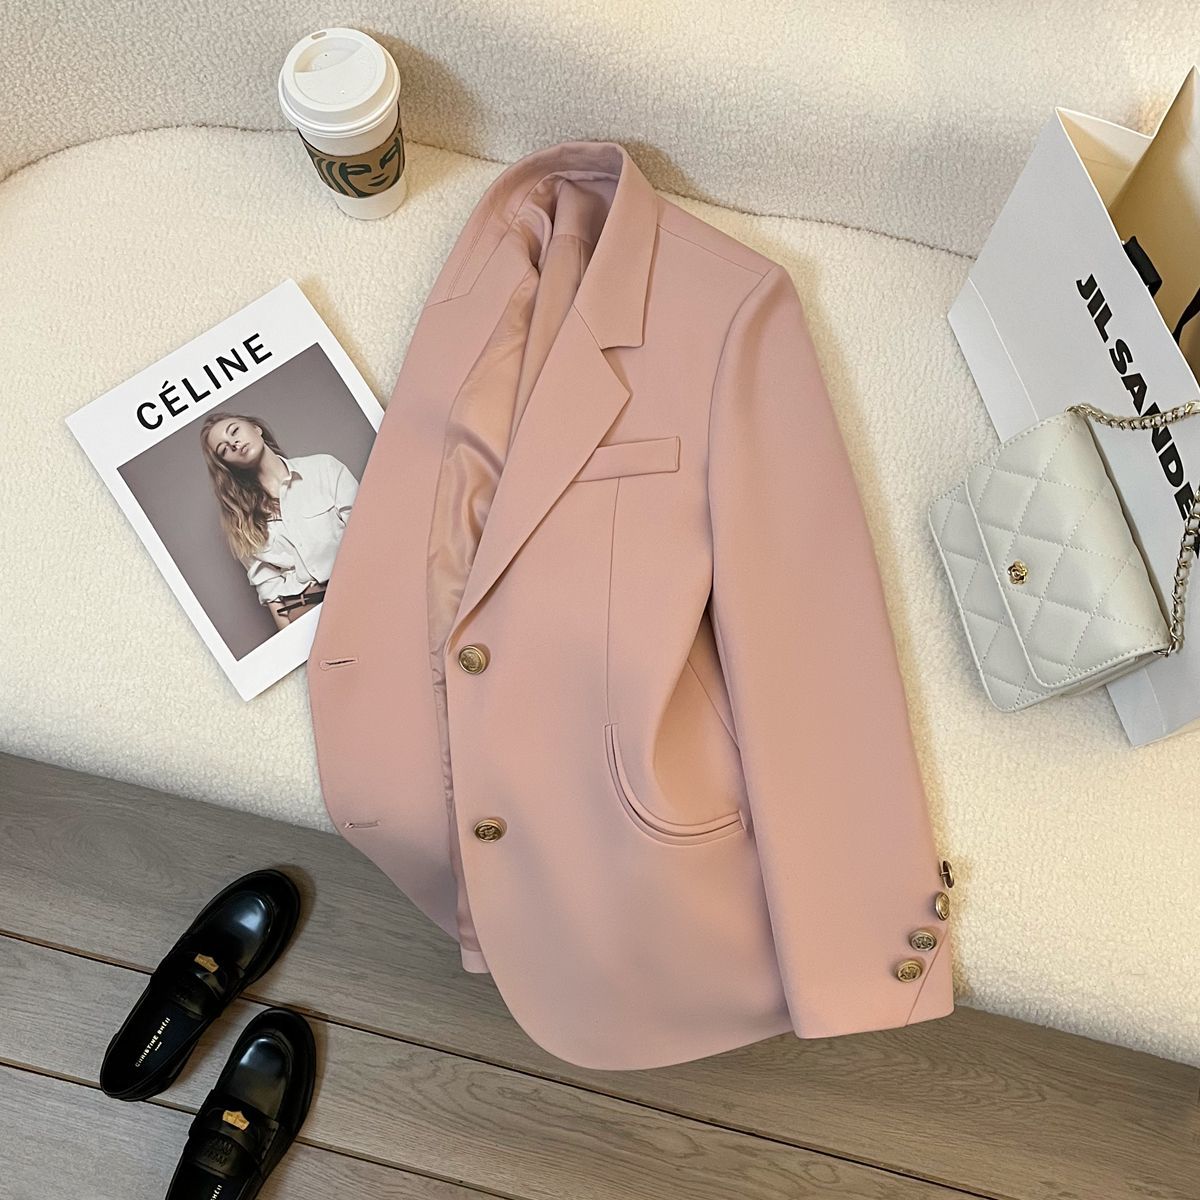 Pink suit jacket for women  spring and autumn style gentle and sweet small casual and versatile small suit top